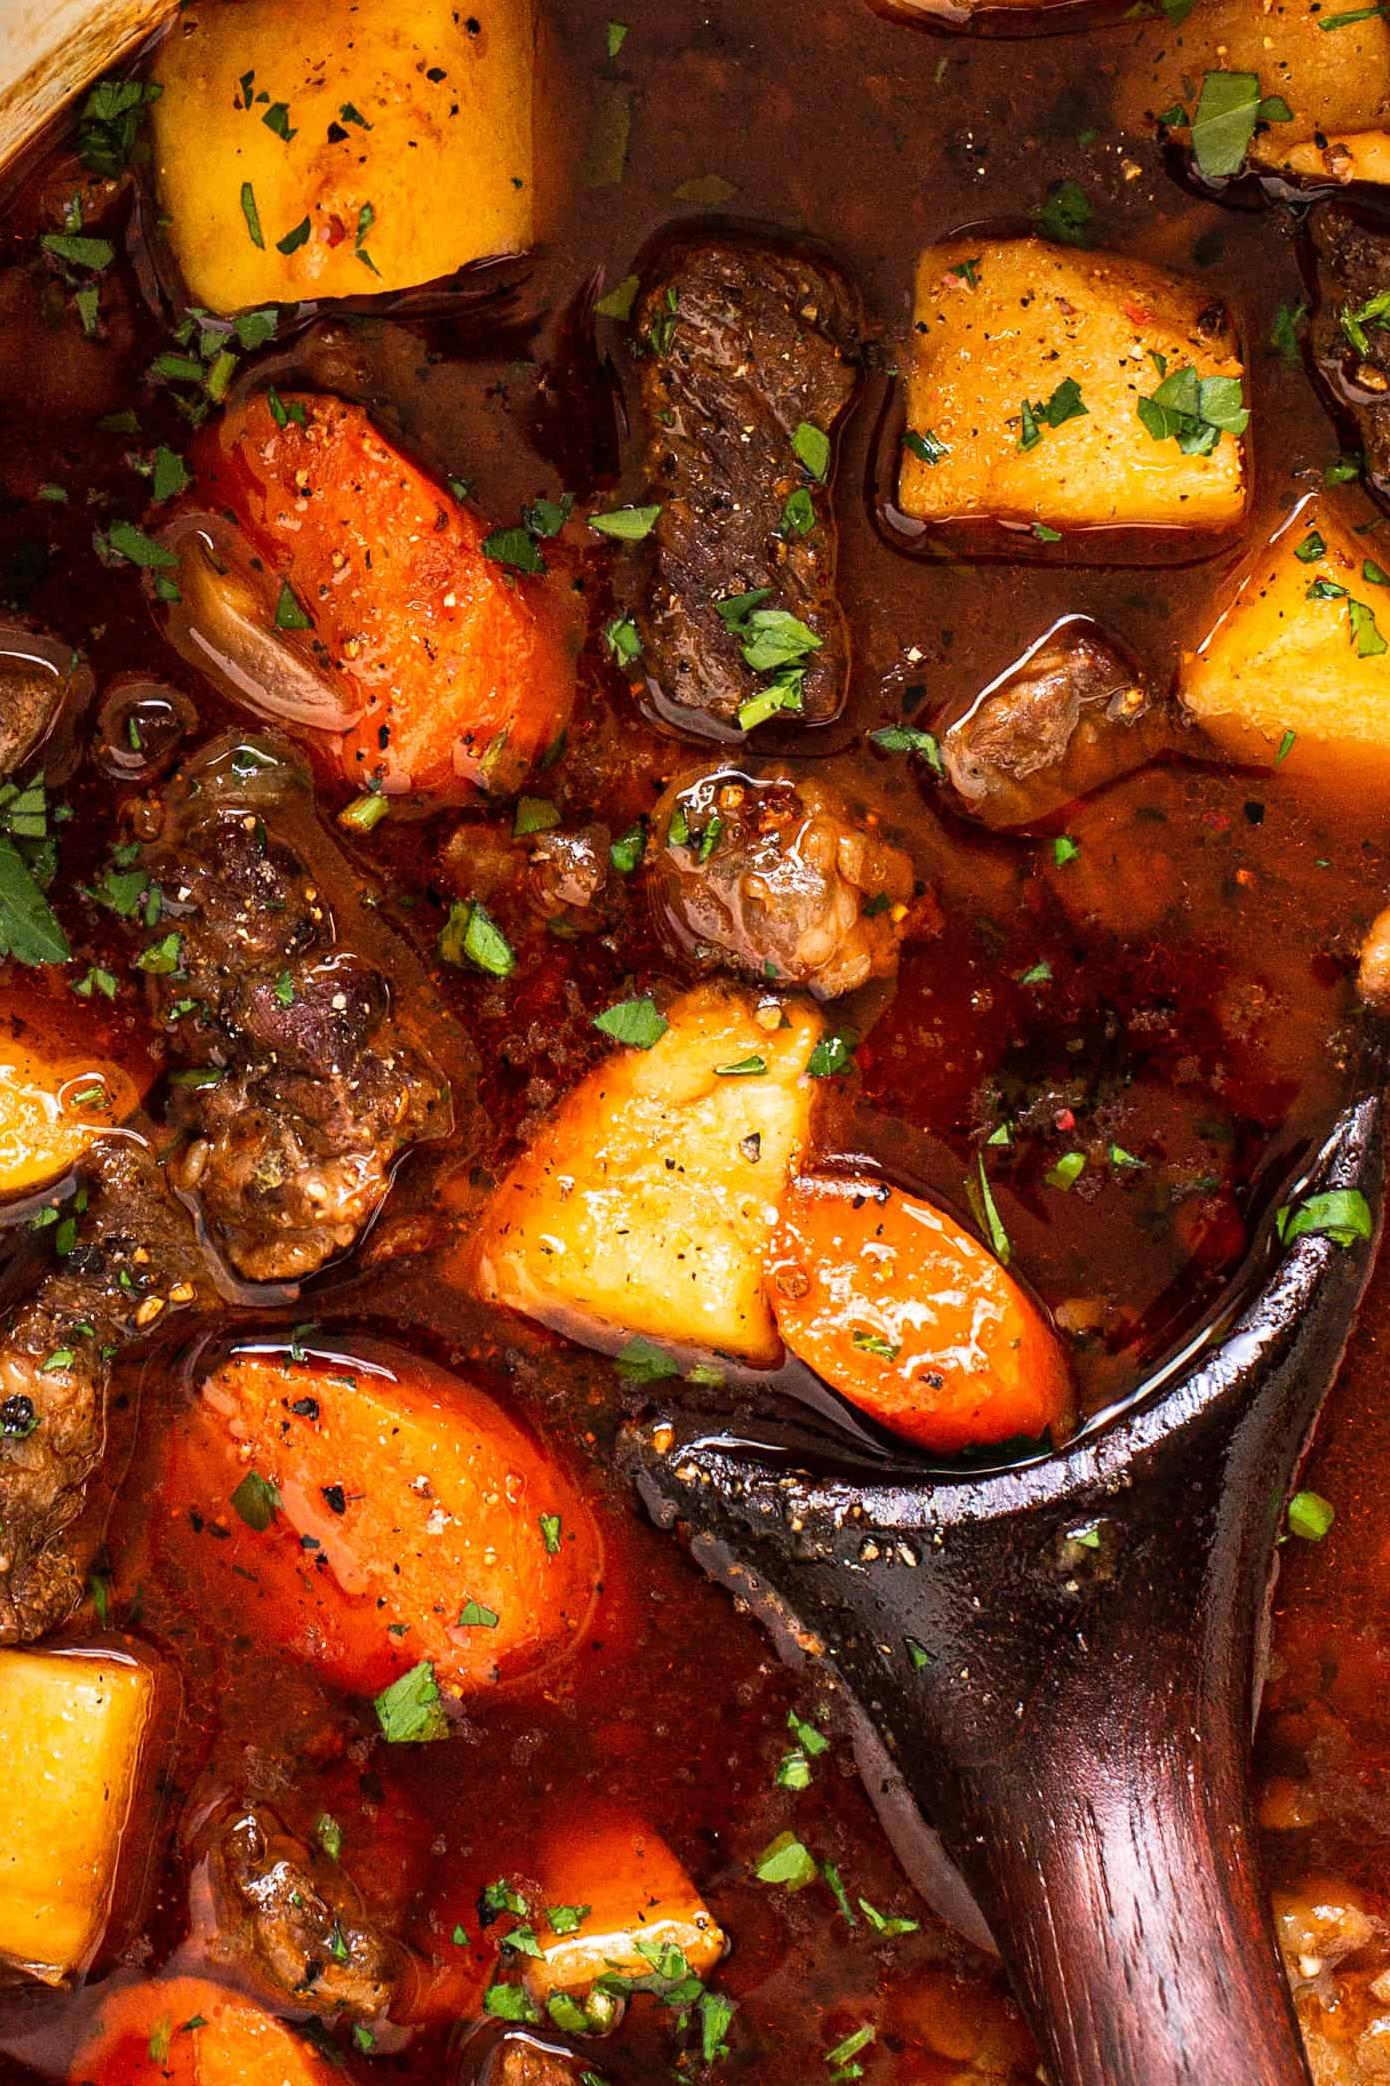  Filled with flavor, this stew is sure to impress your taste buds